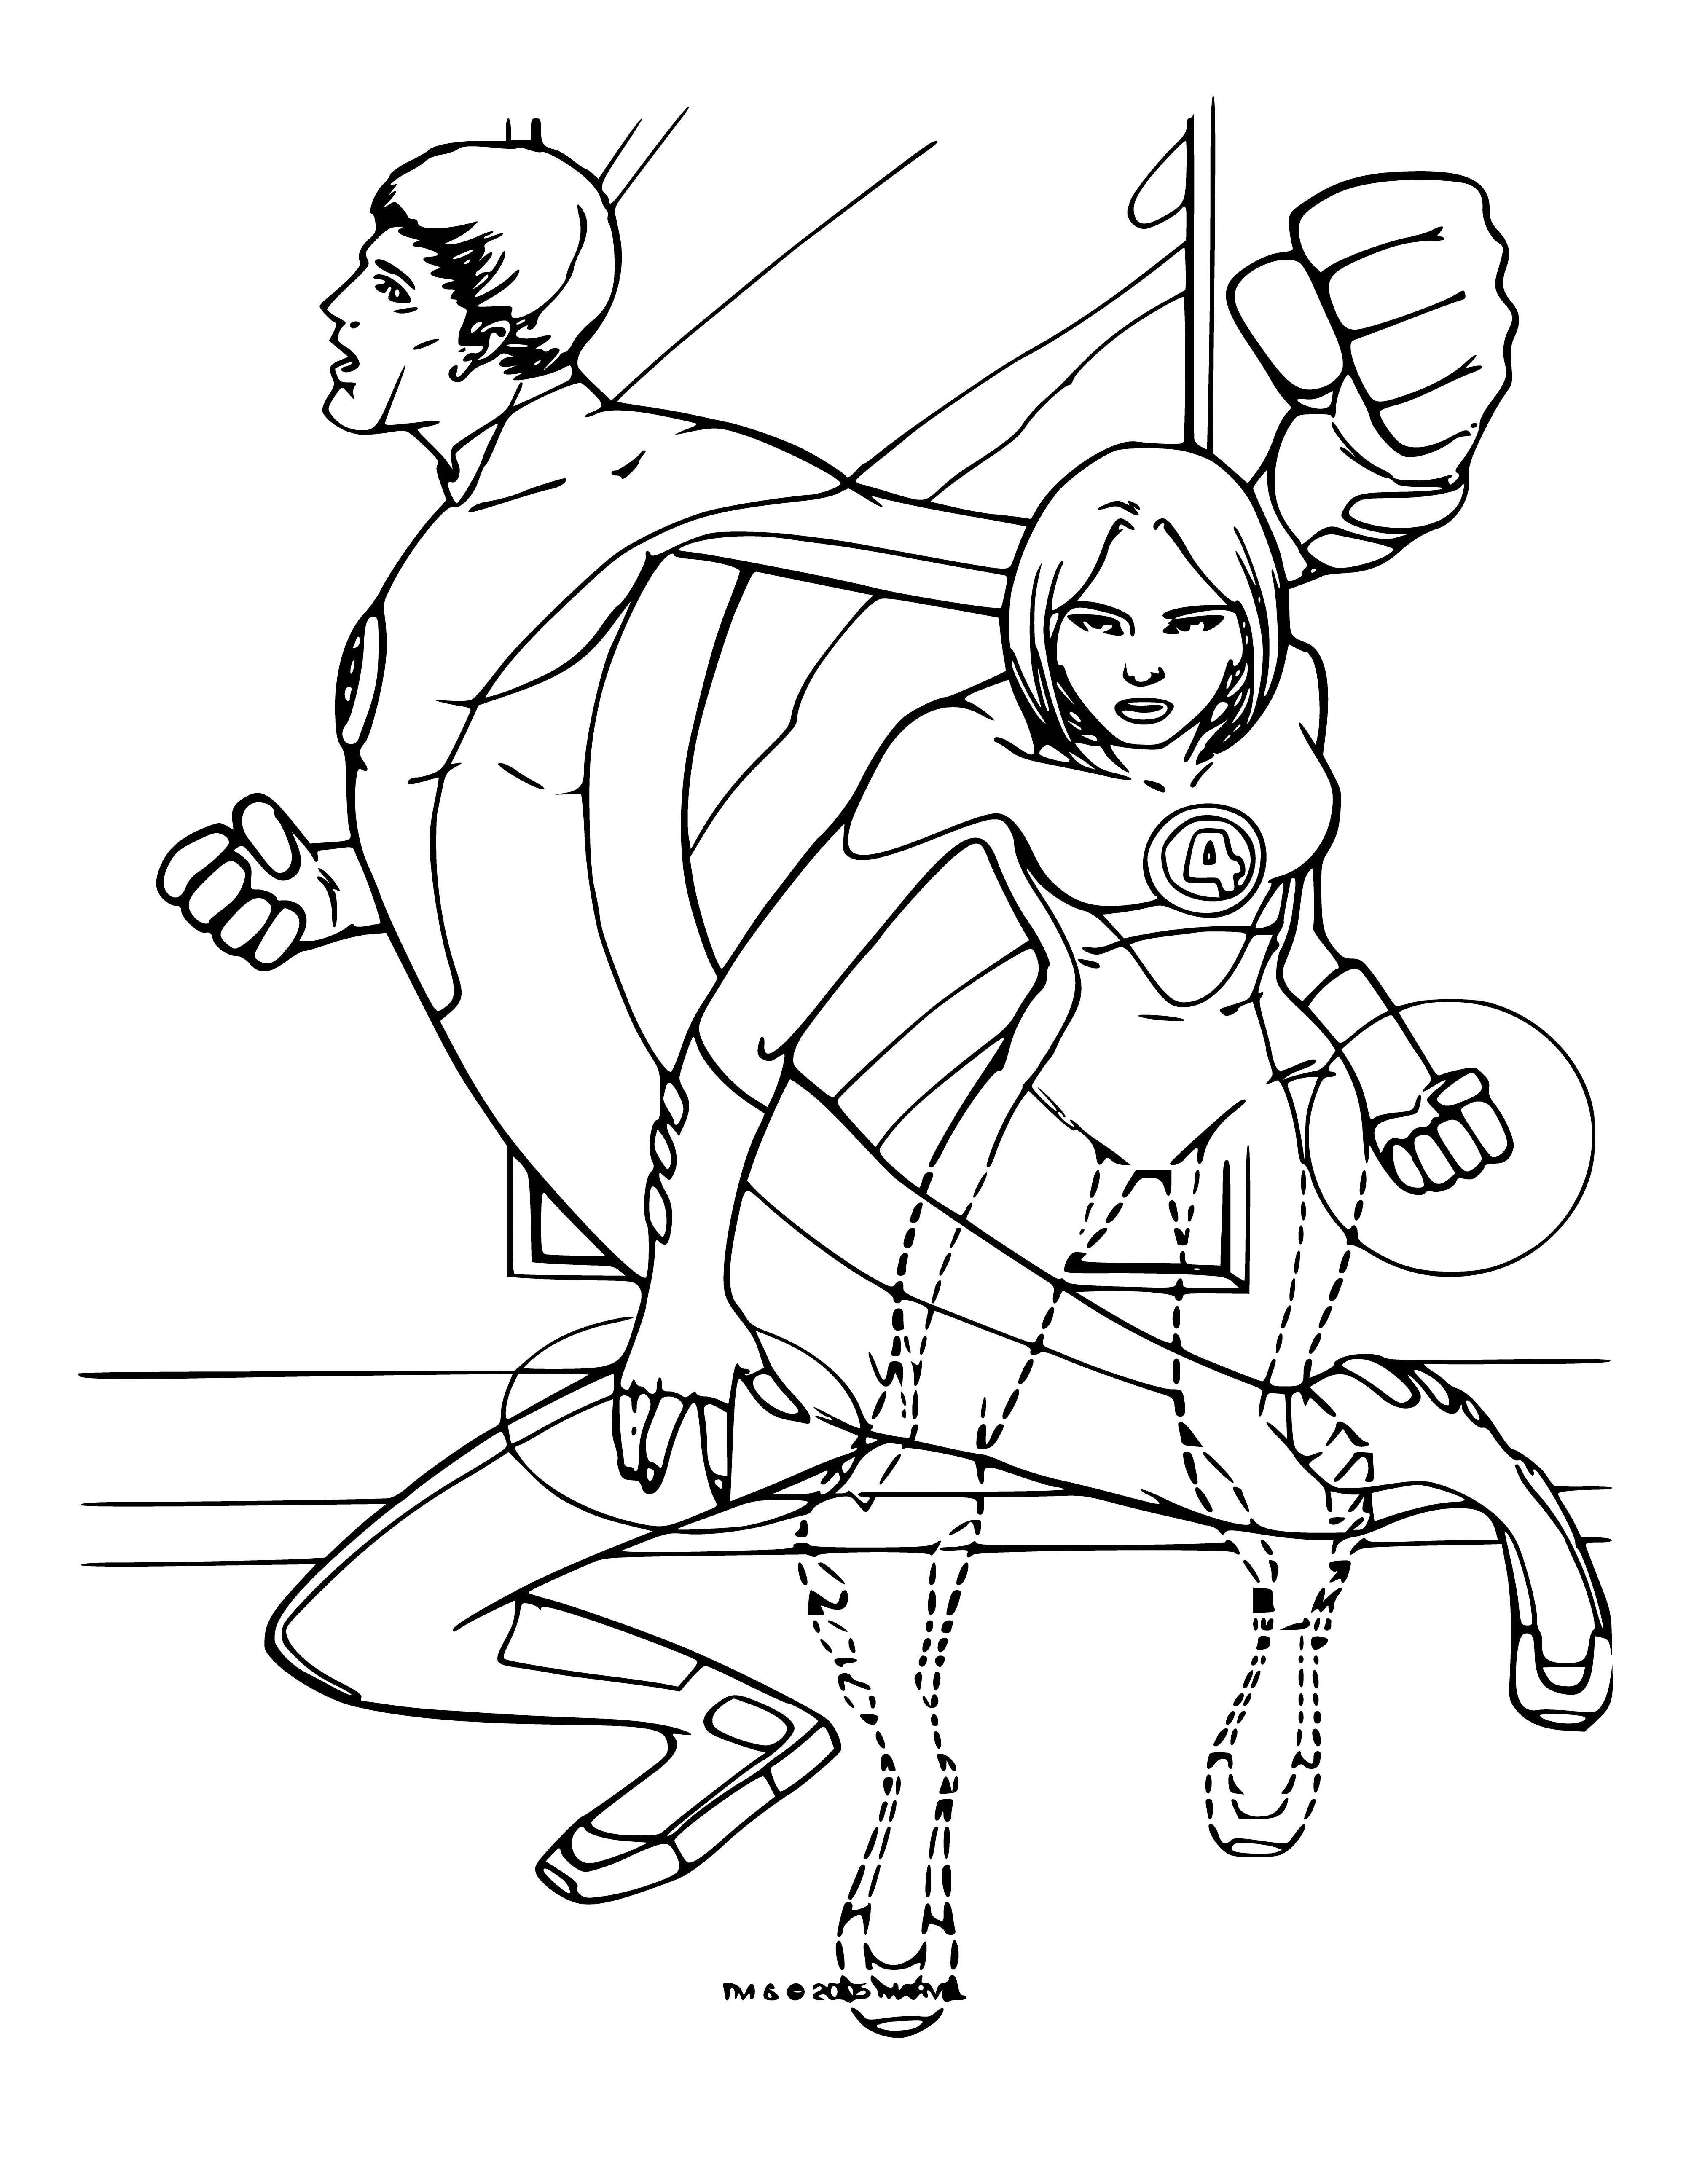 coloring page: Fantastic Four fly through air, each wearing a suit except Thing (covered in orange rock), faces serious.